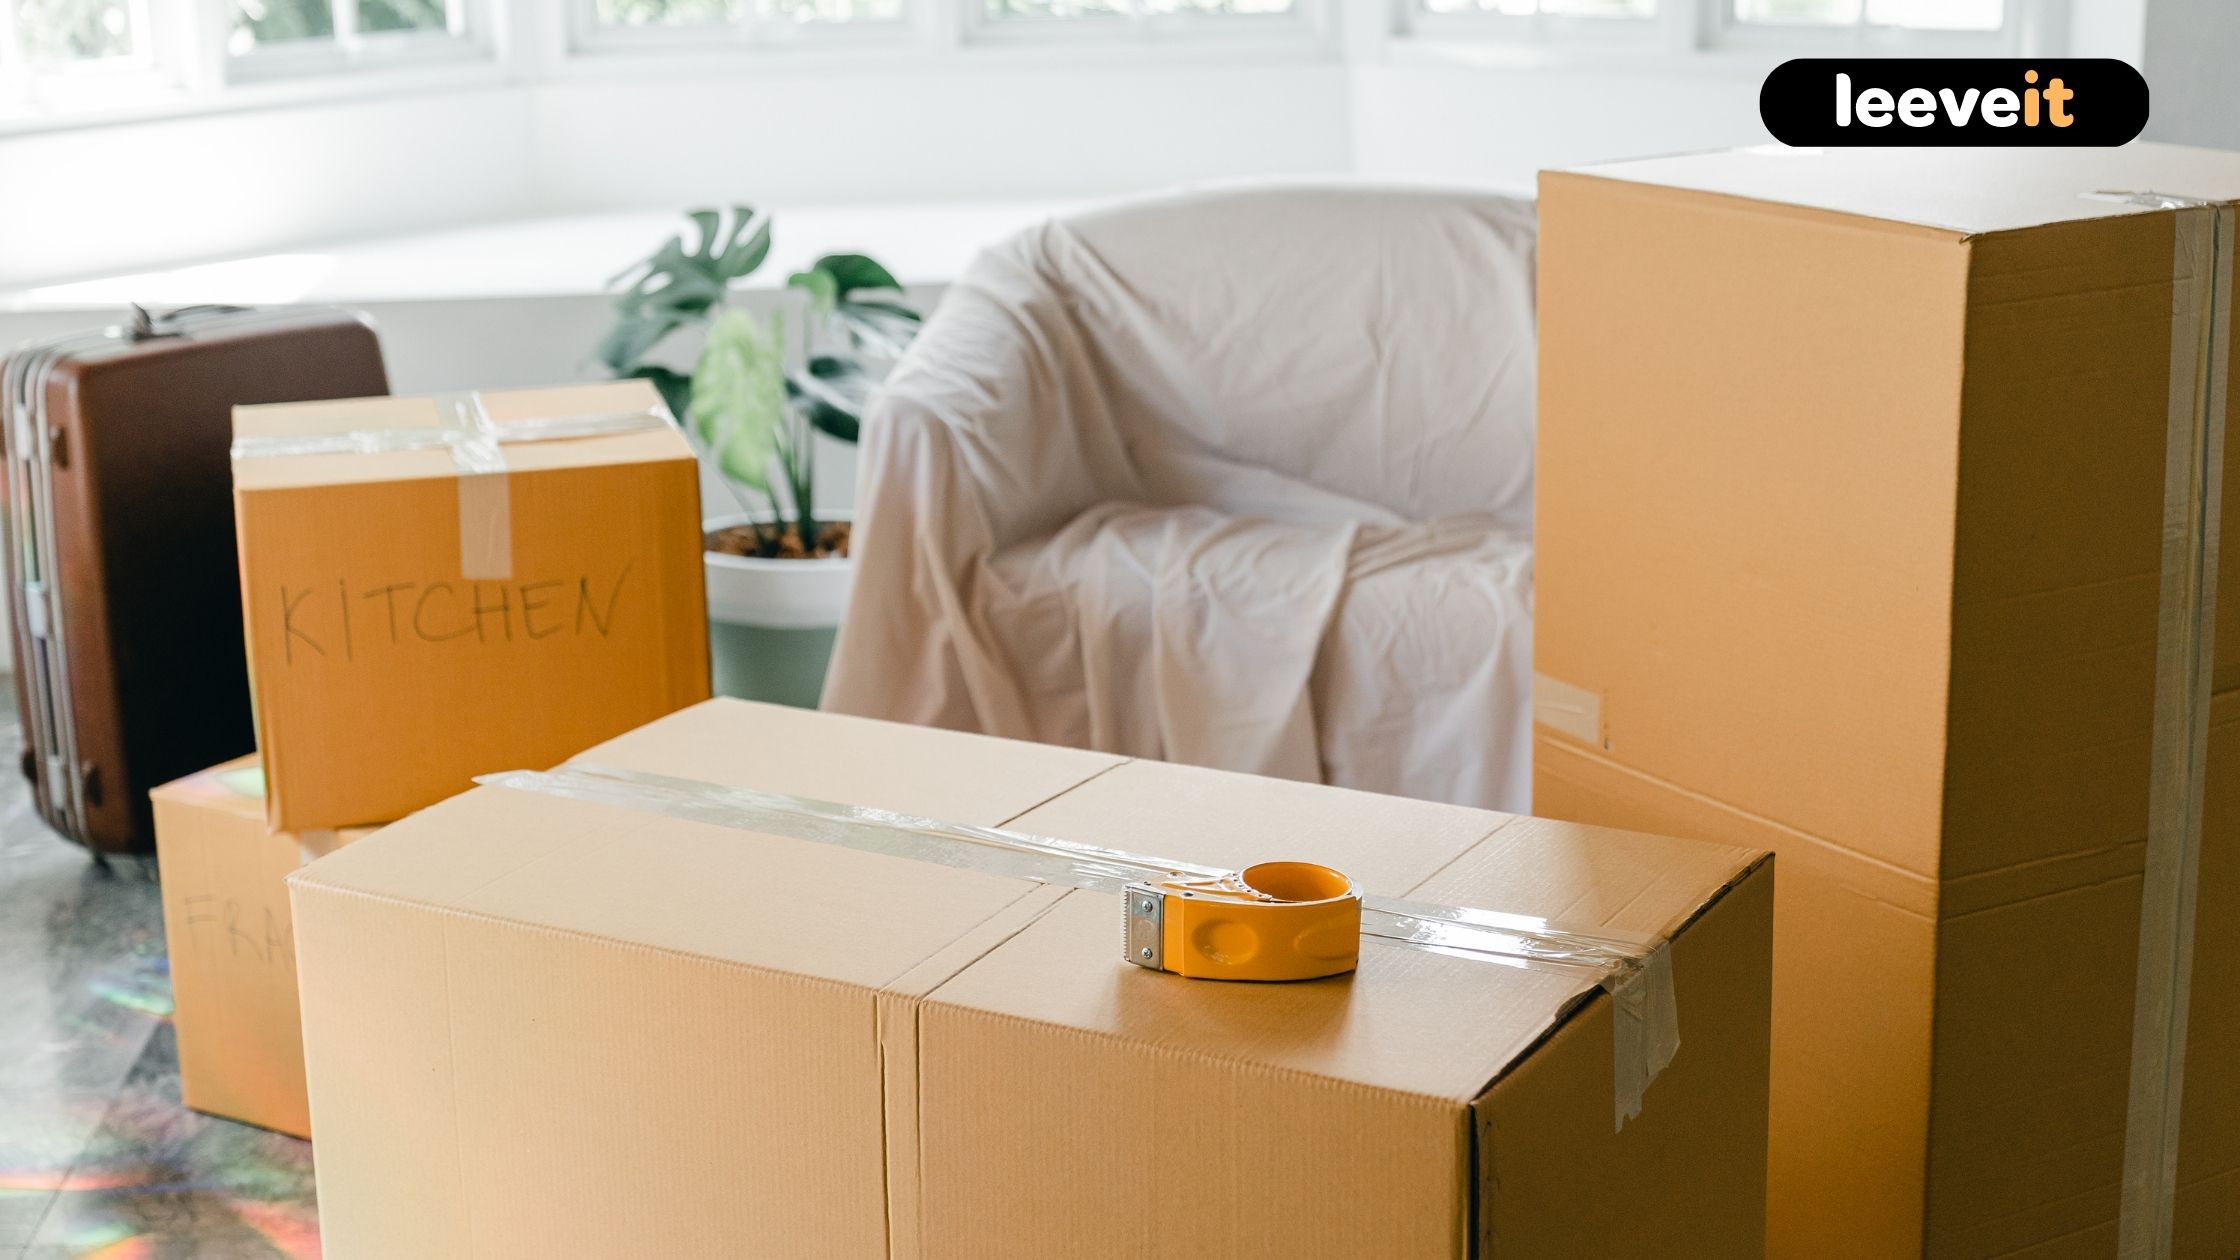 Storage Unit Rental Tips For First-Time Renters